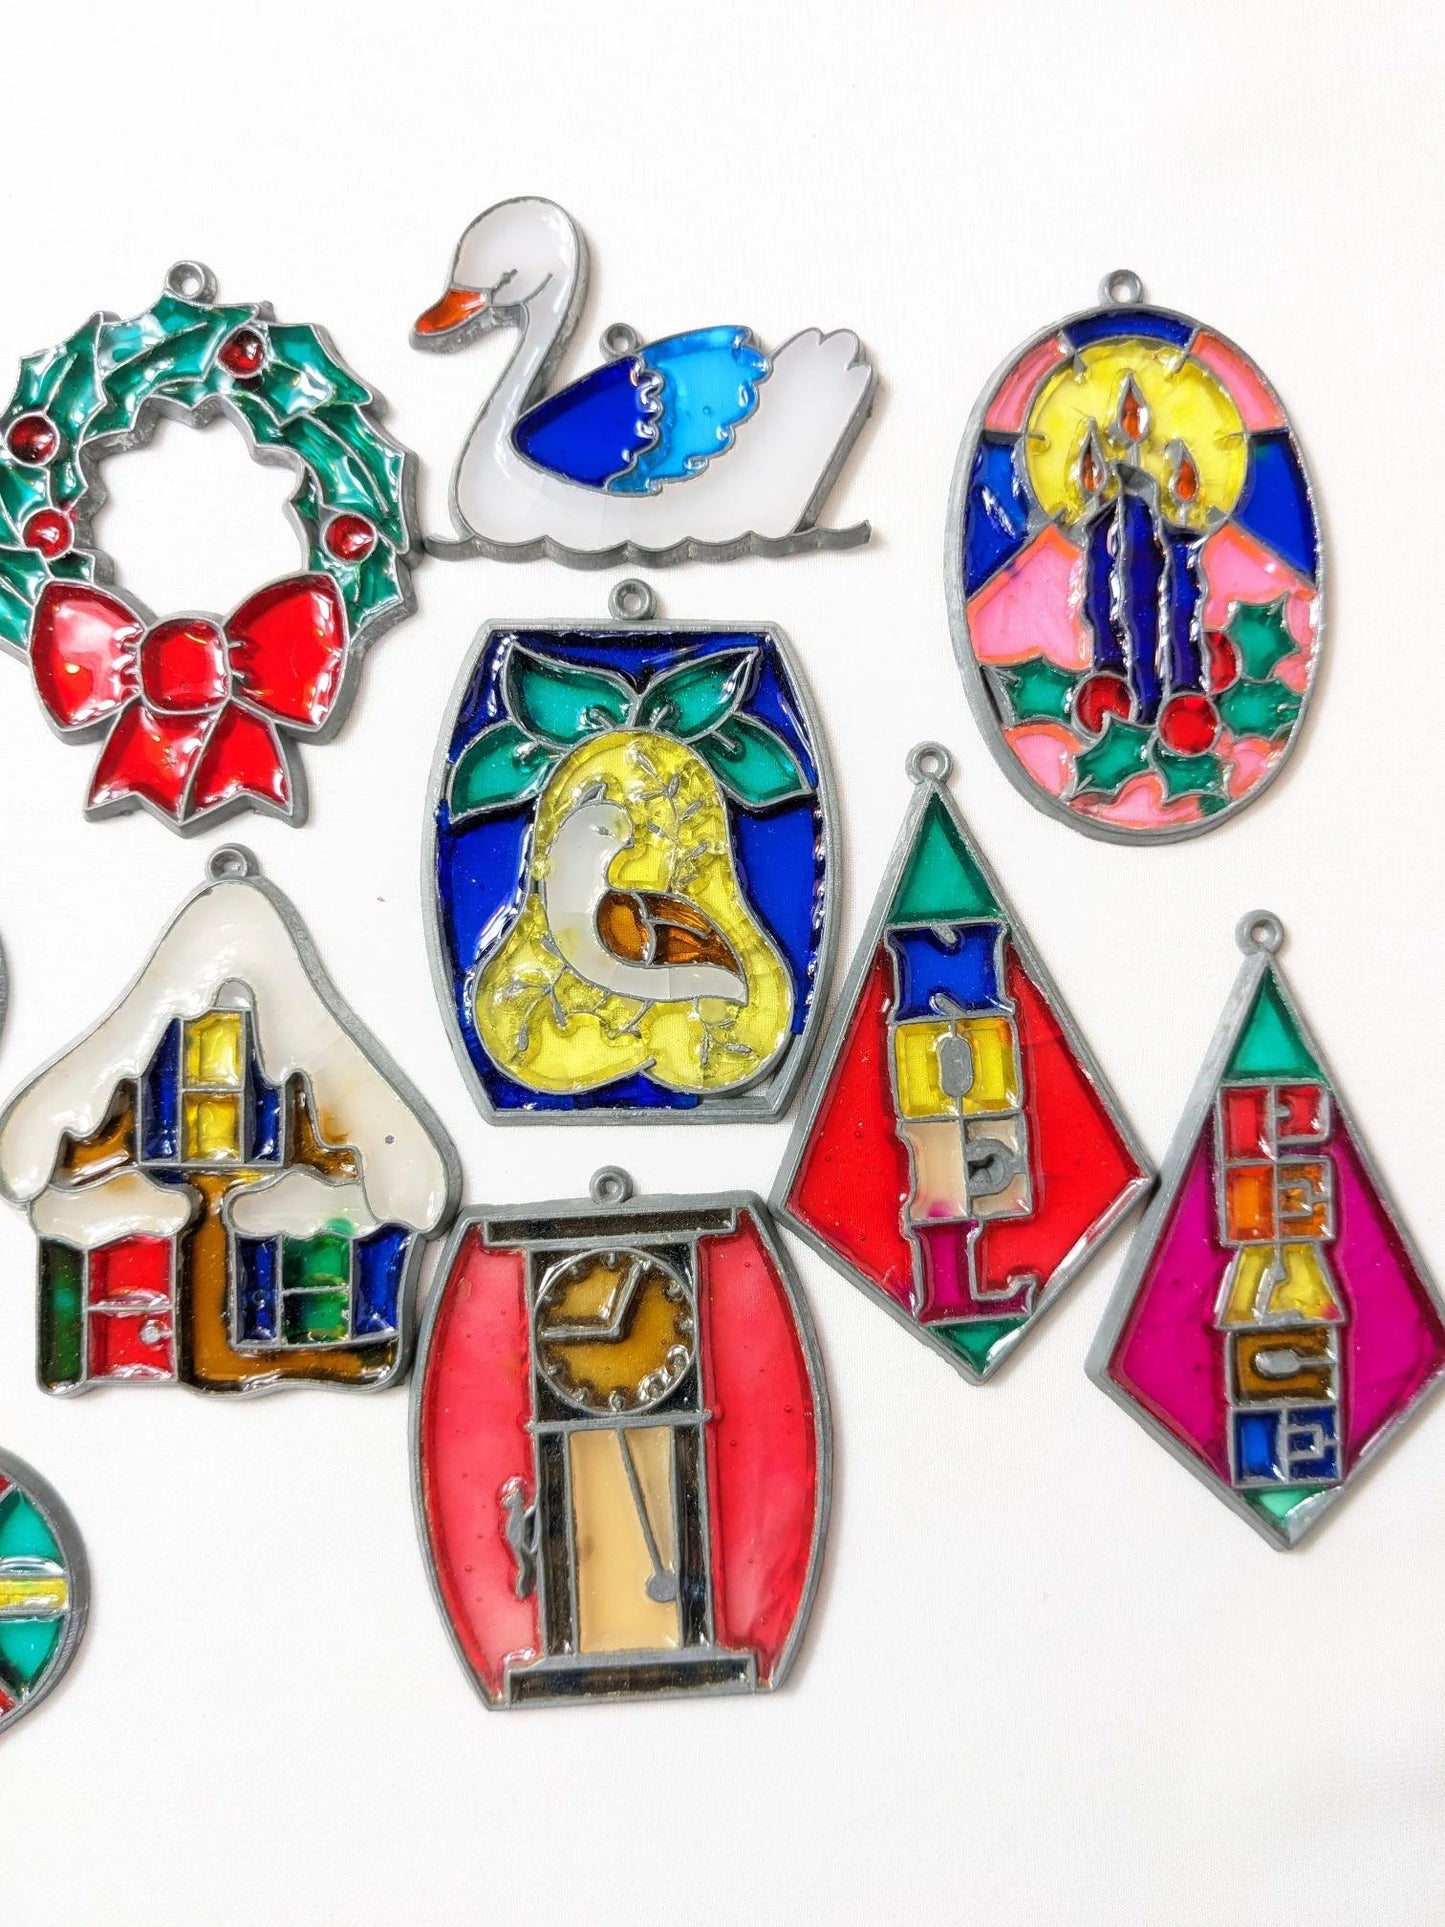 1970s Faux Stained-Glass Christmas Ornaments